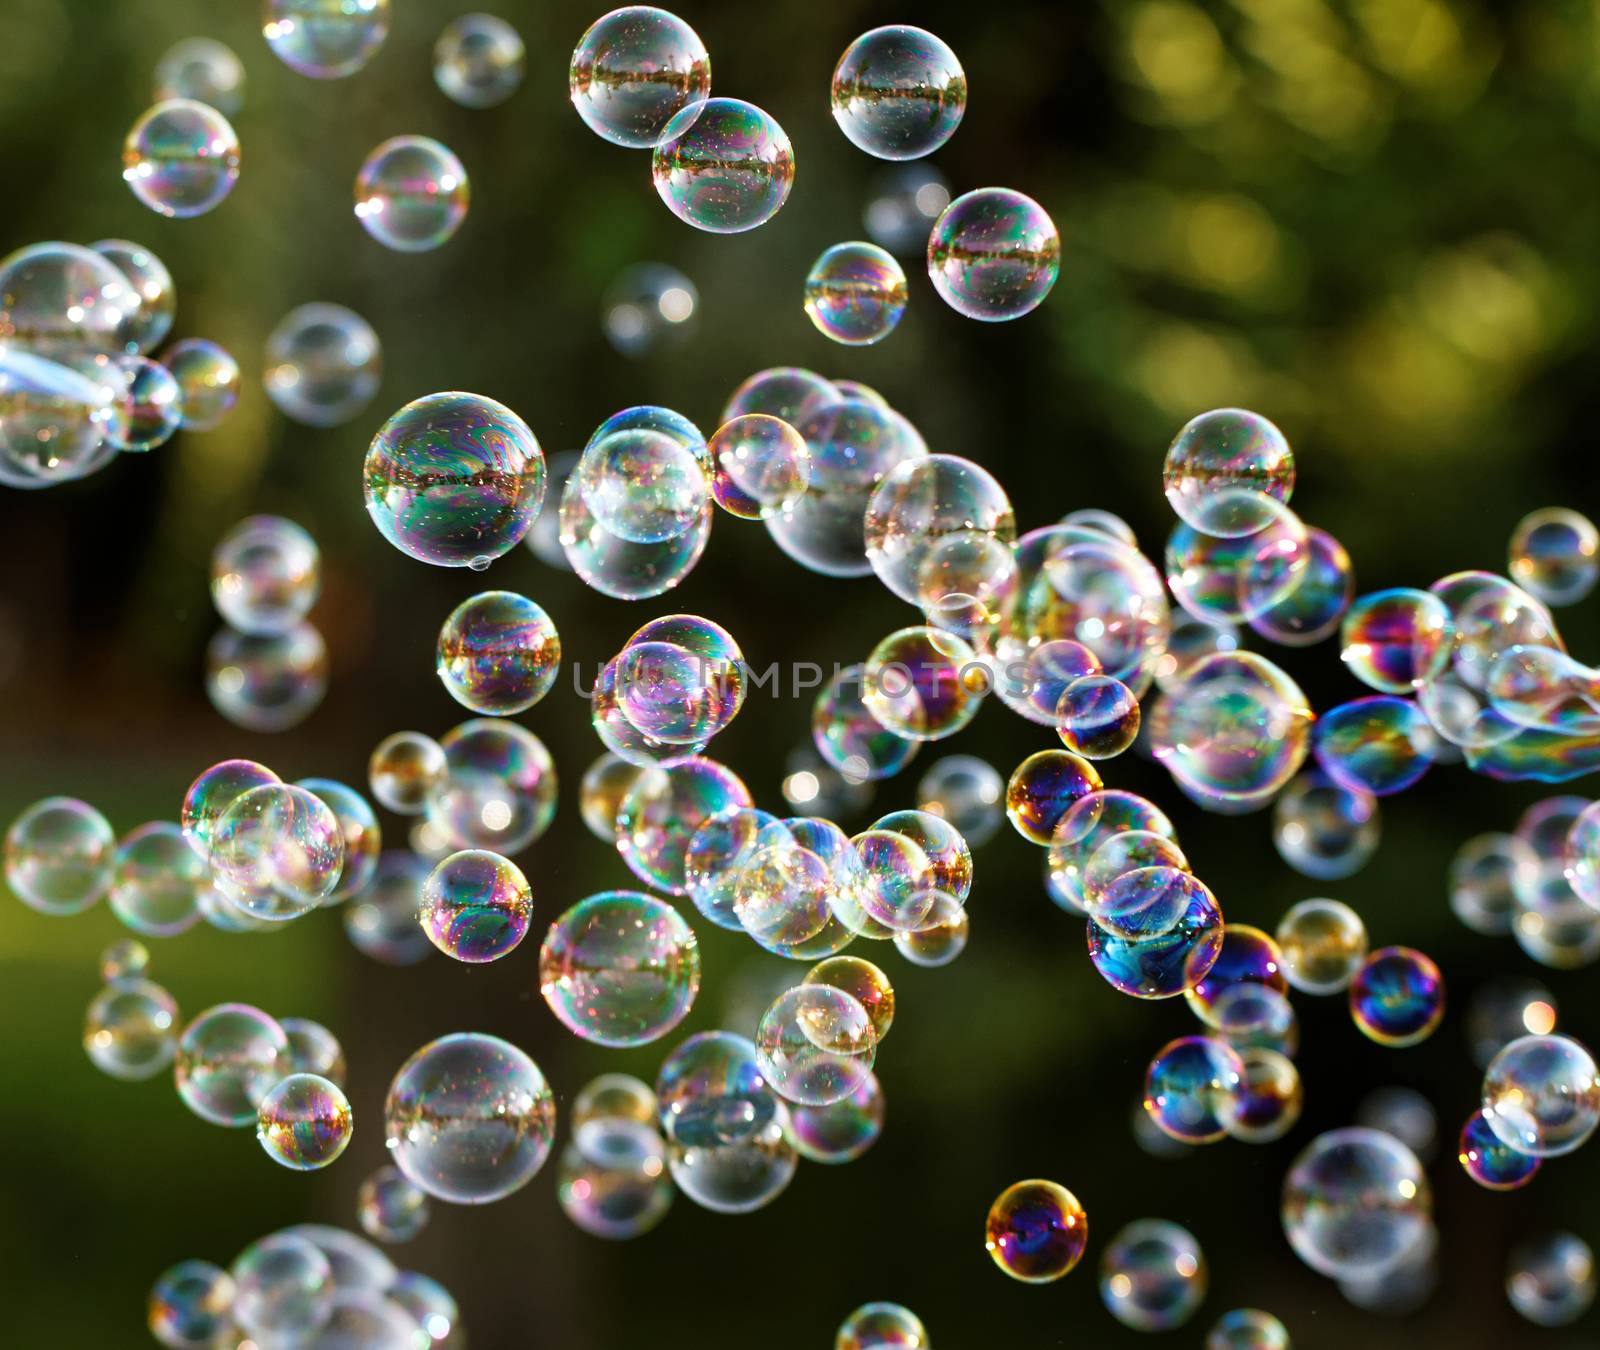 Soap bubbles by Nneirda